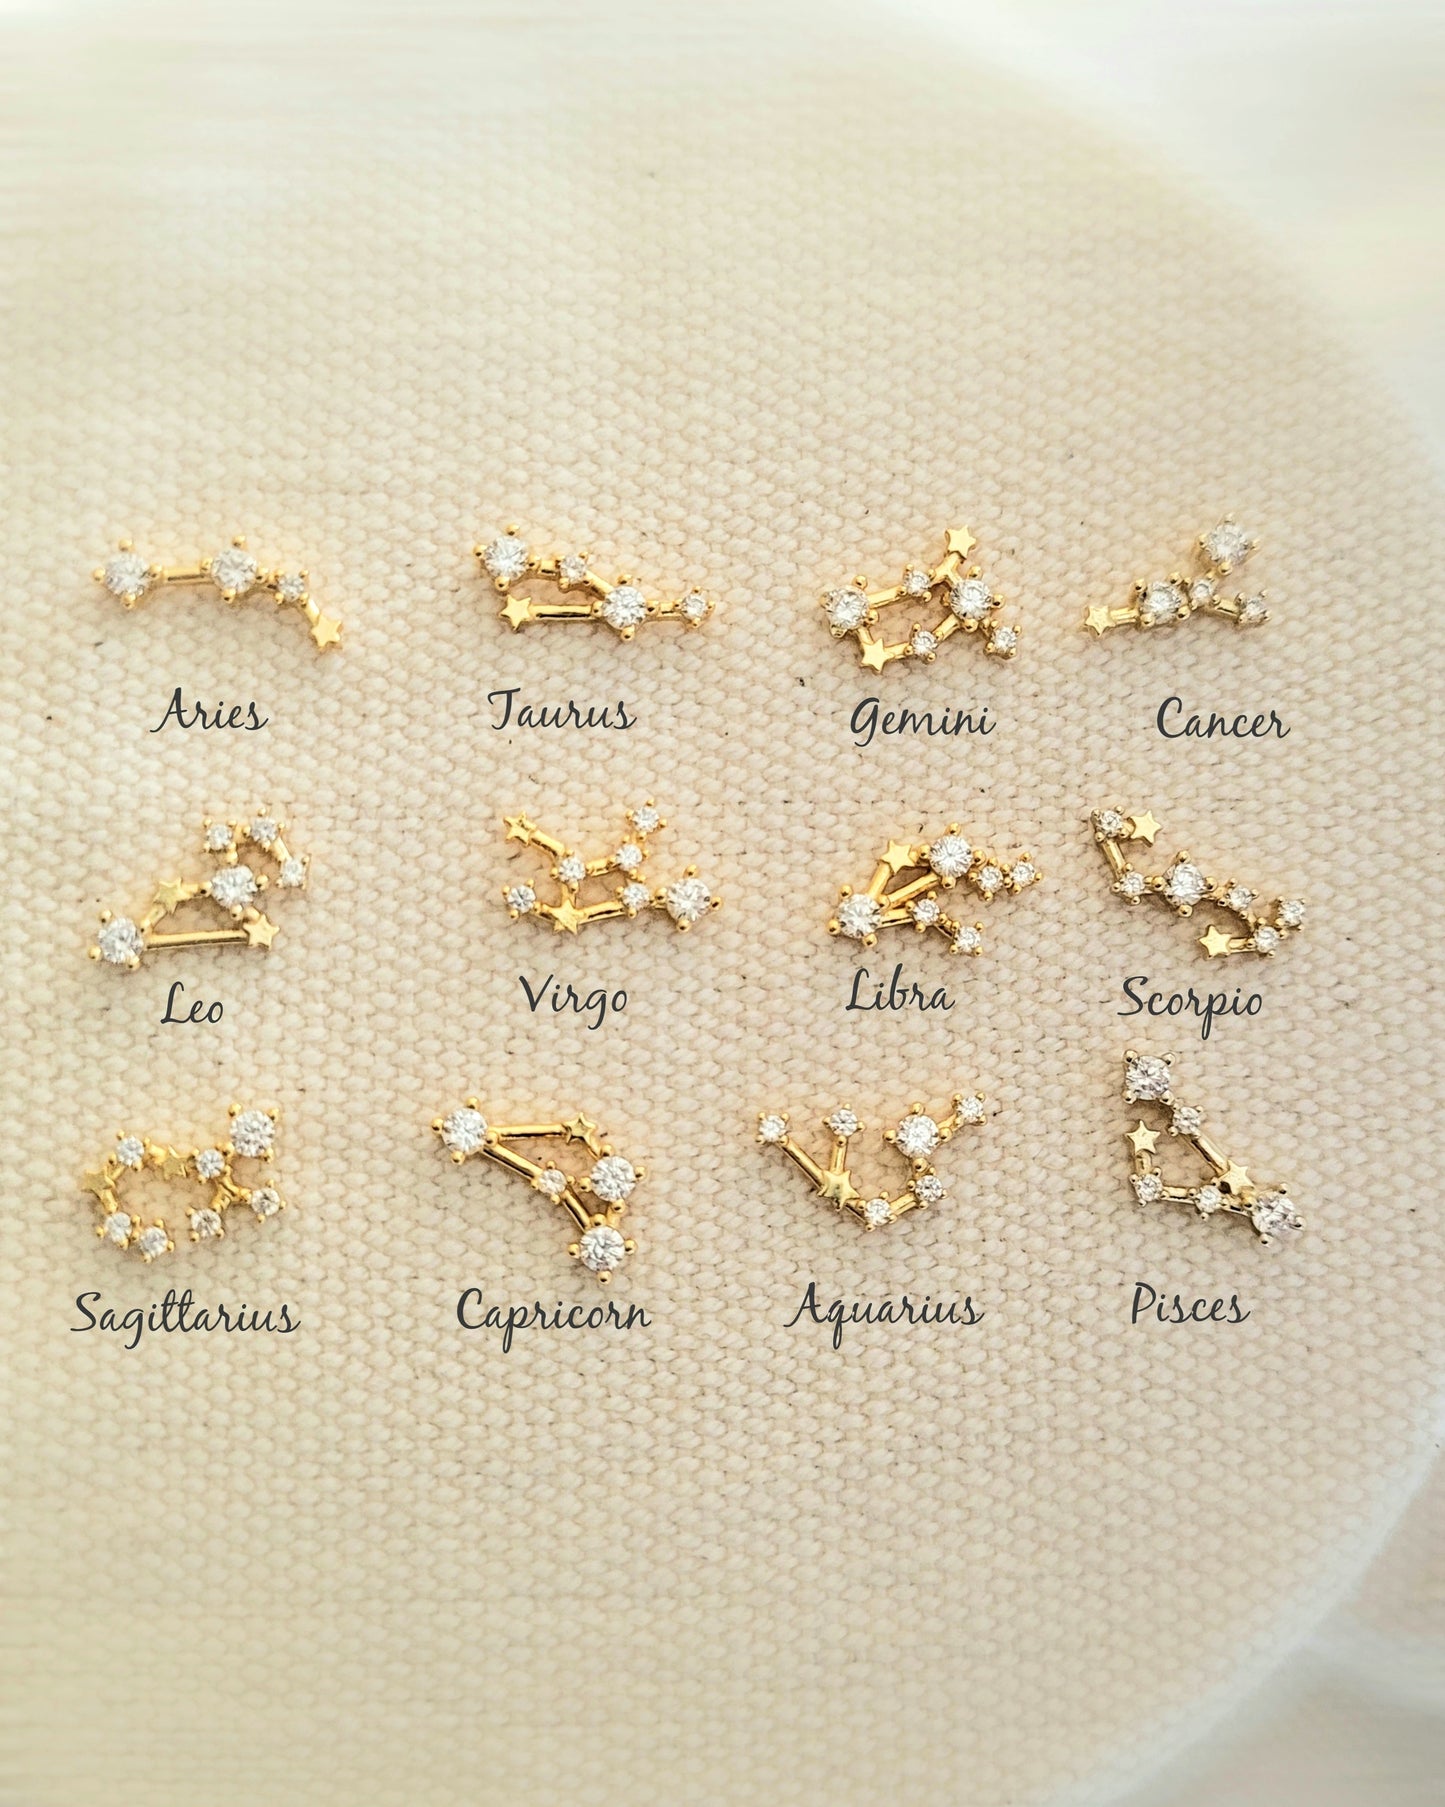 Gift for her: Zodiac Constellation Earring Aries